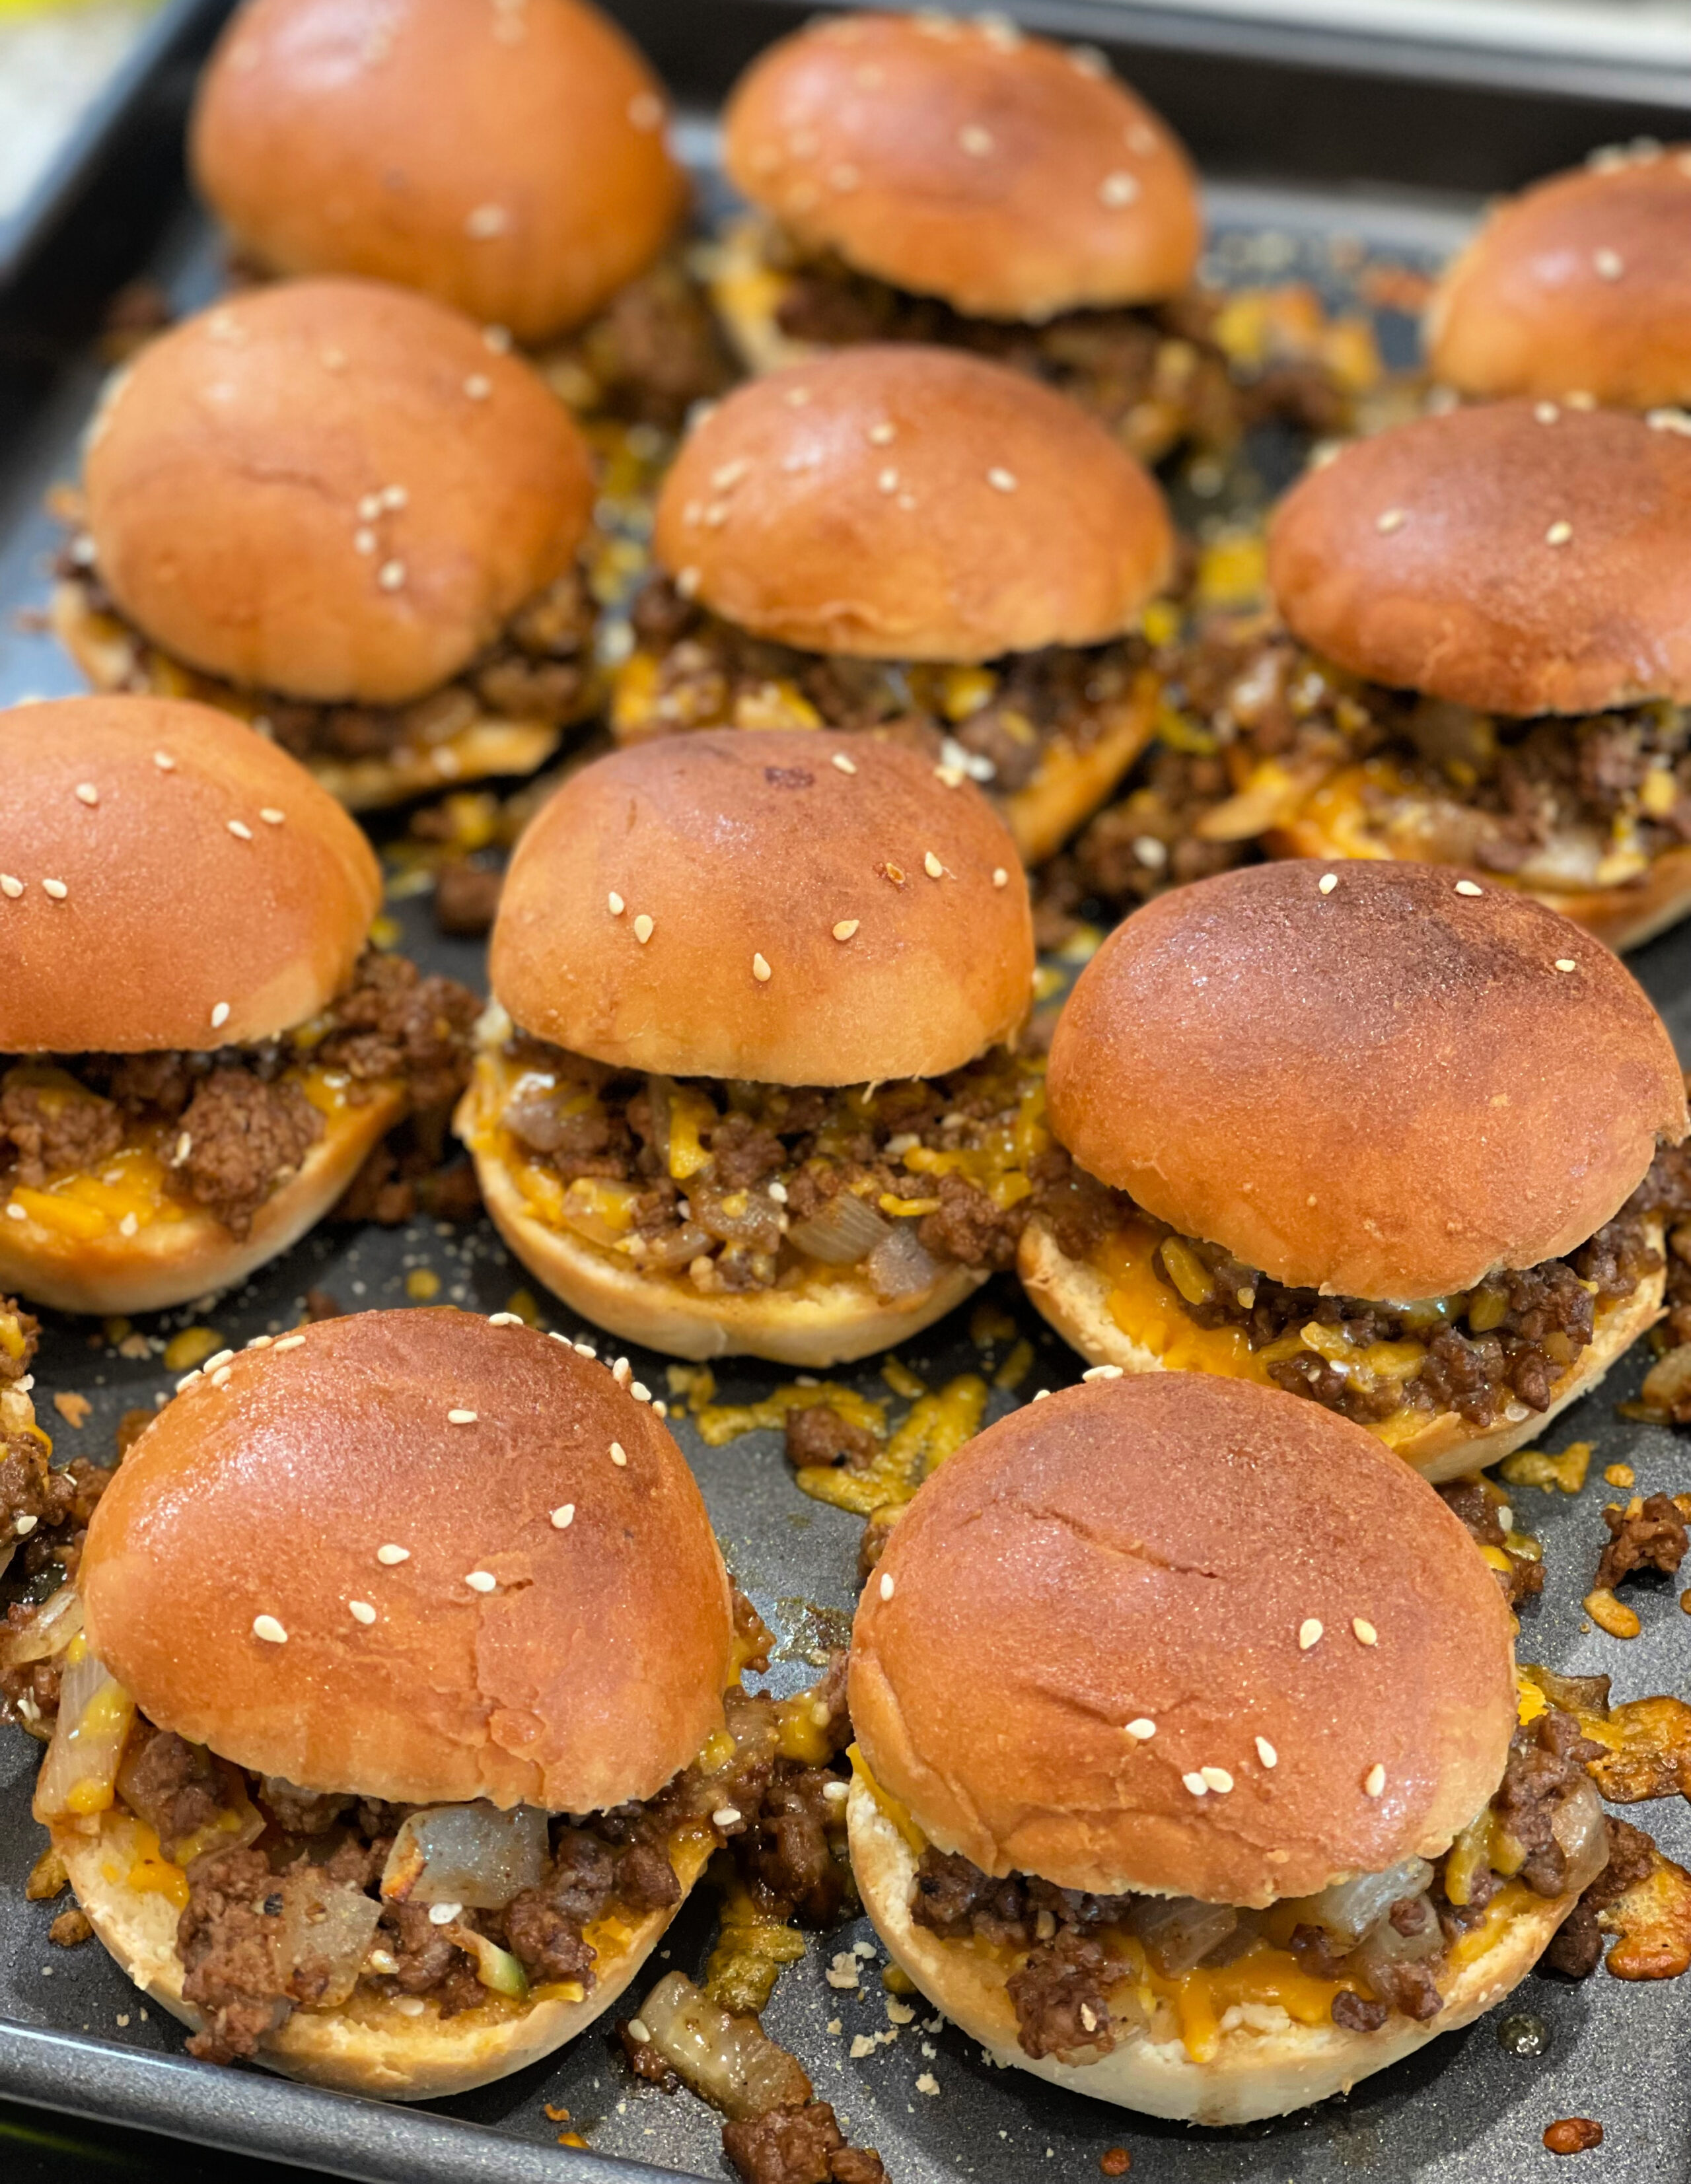 sloppy joe sliders lined up on a cookie sheet after baking in the oven.